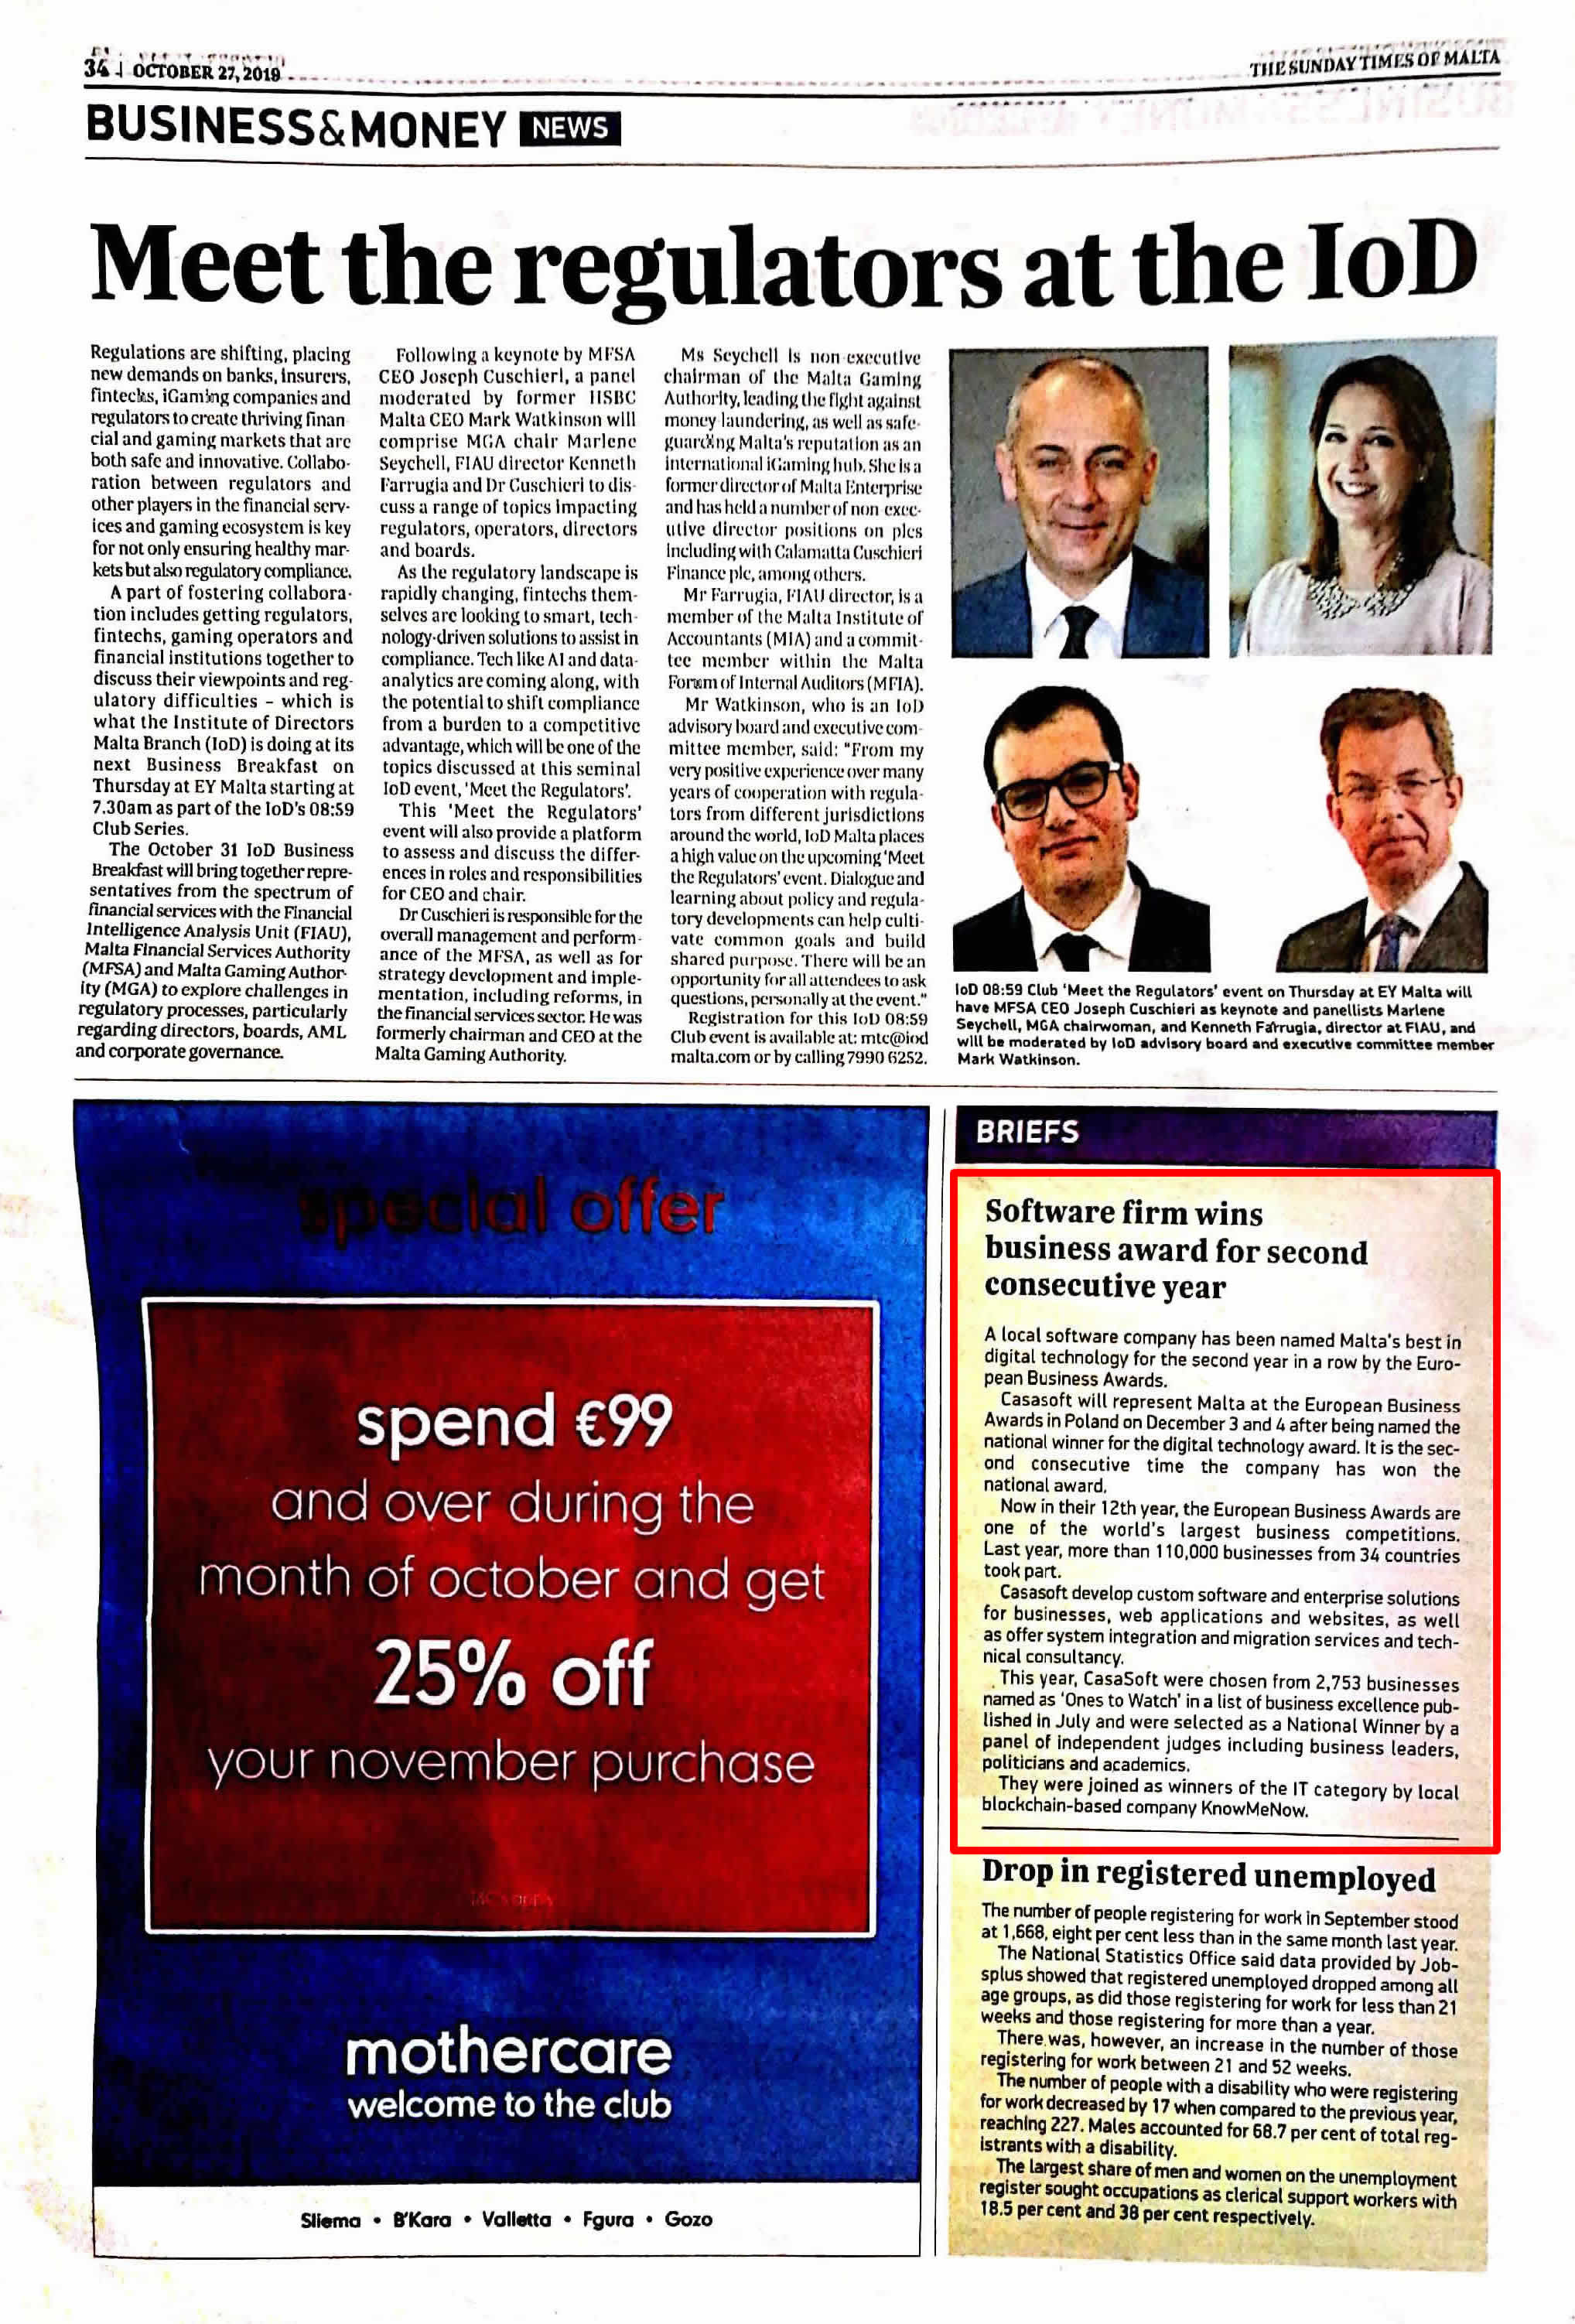 CasaSoft's achievement featured in the Sunday Times of Malta (27 Oct 2019) under the Business & Money section